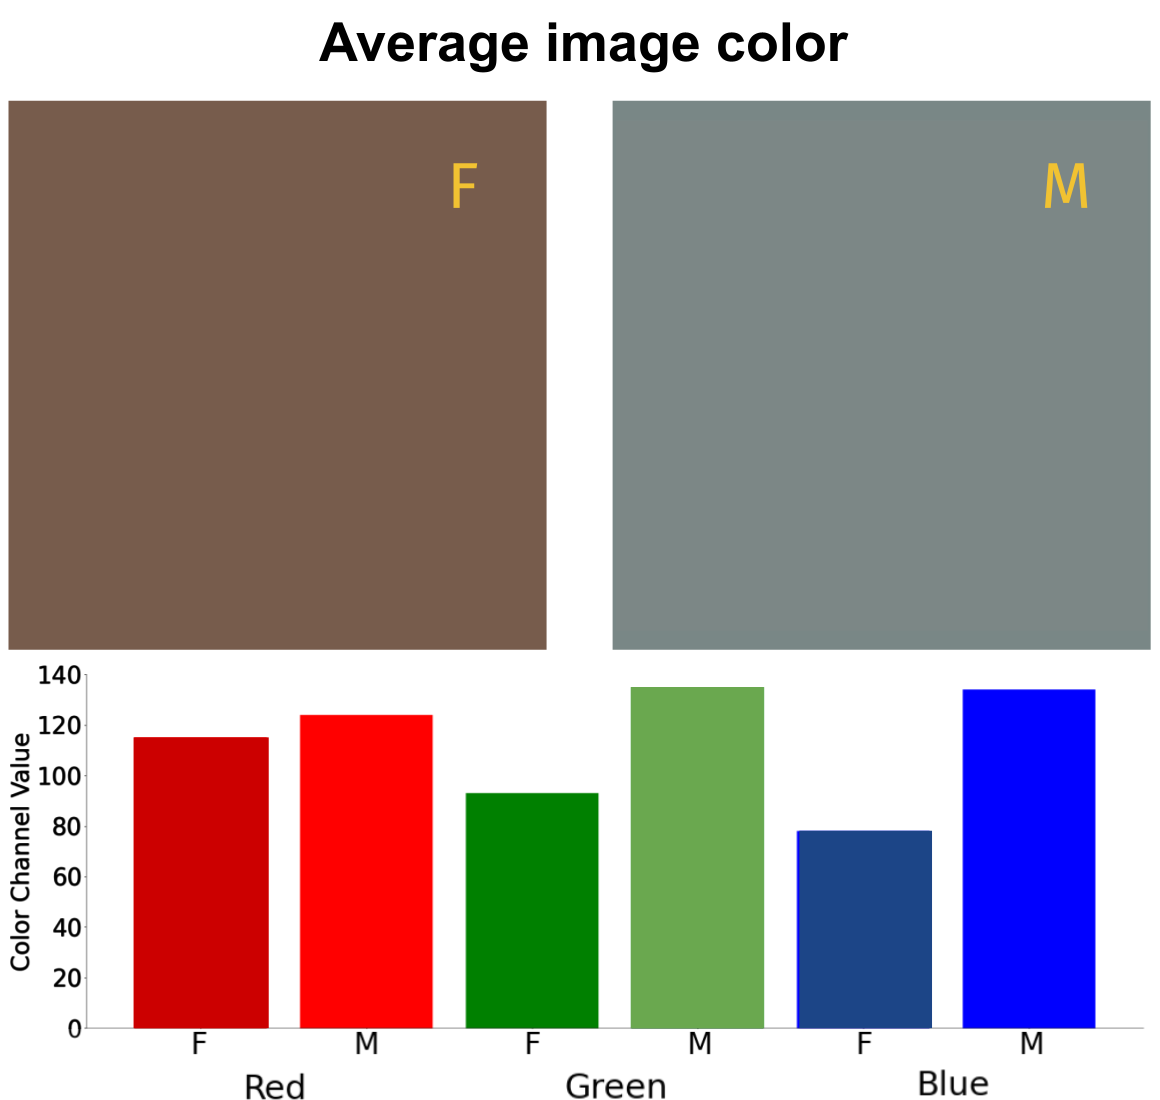 difference in avg color between labelled female and male images